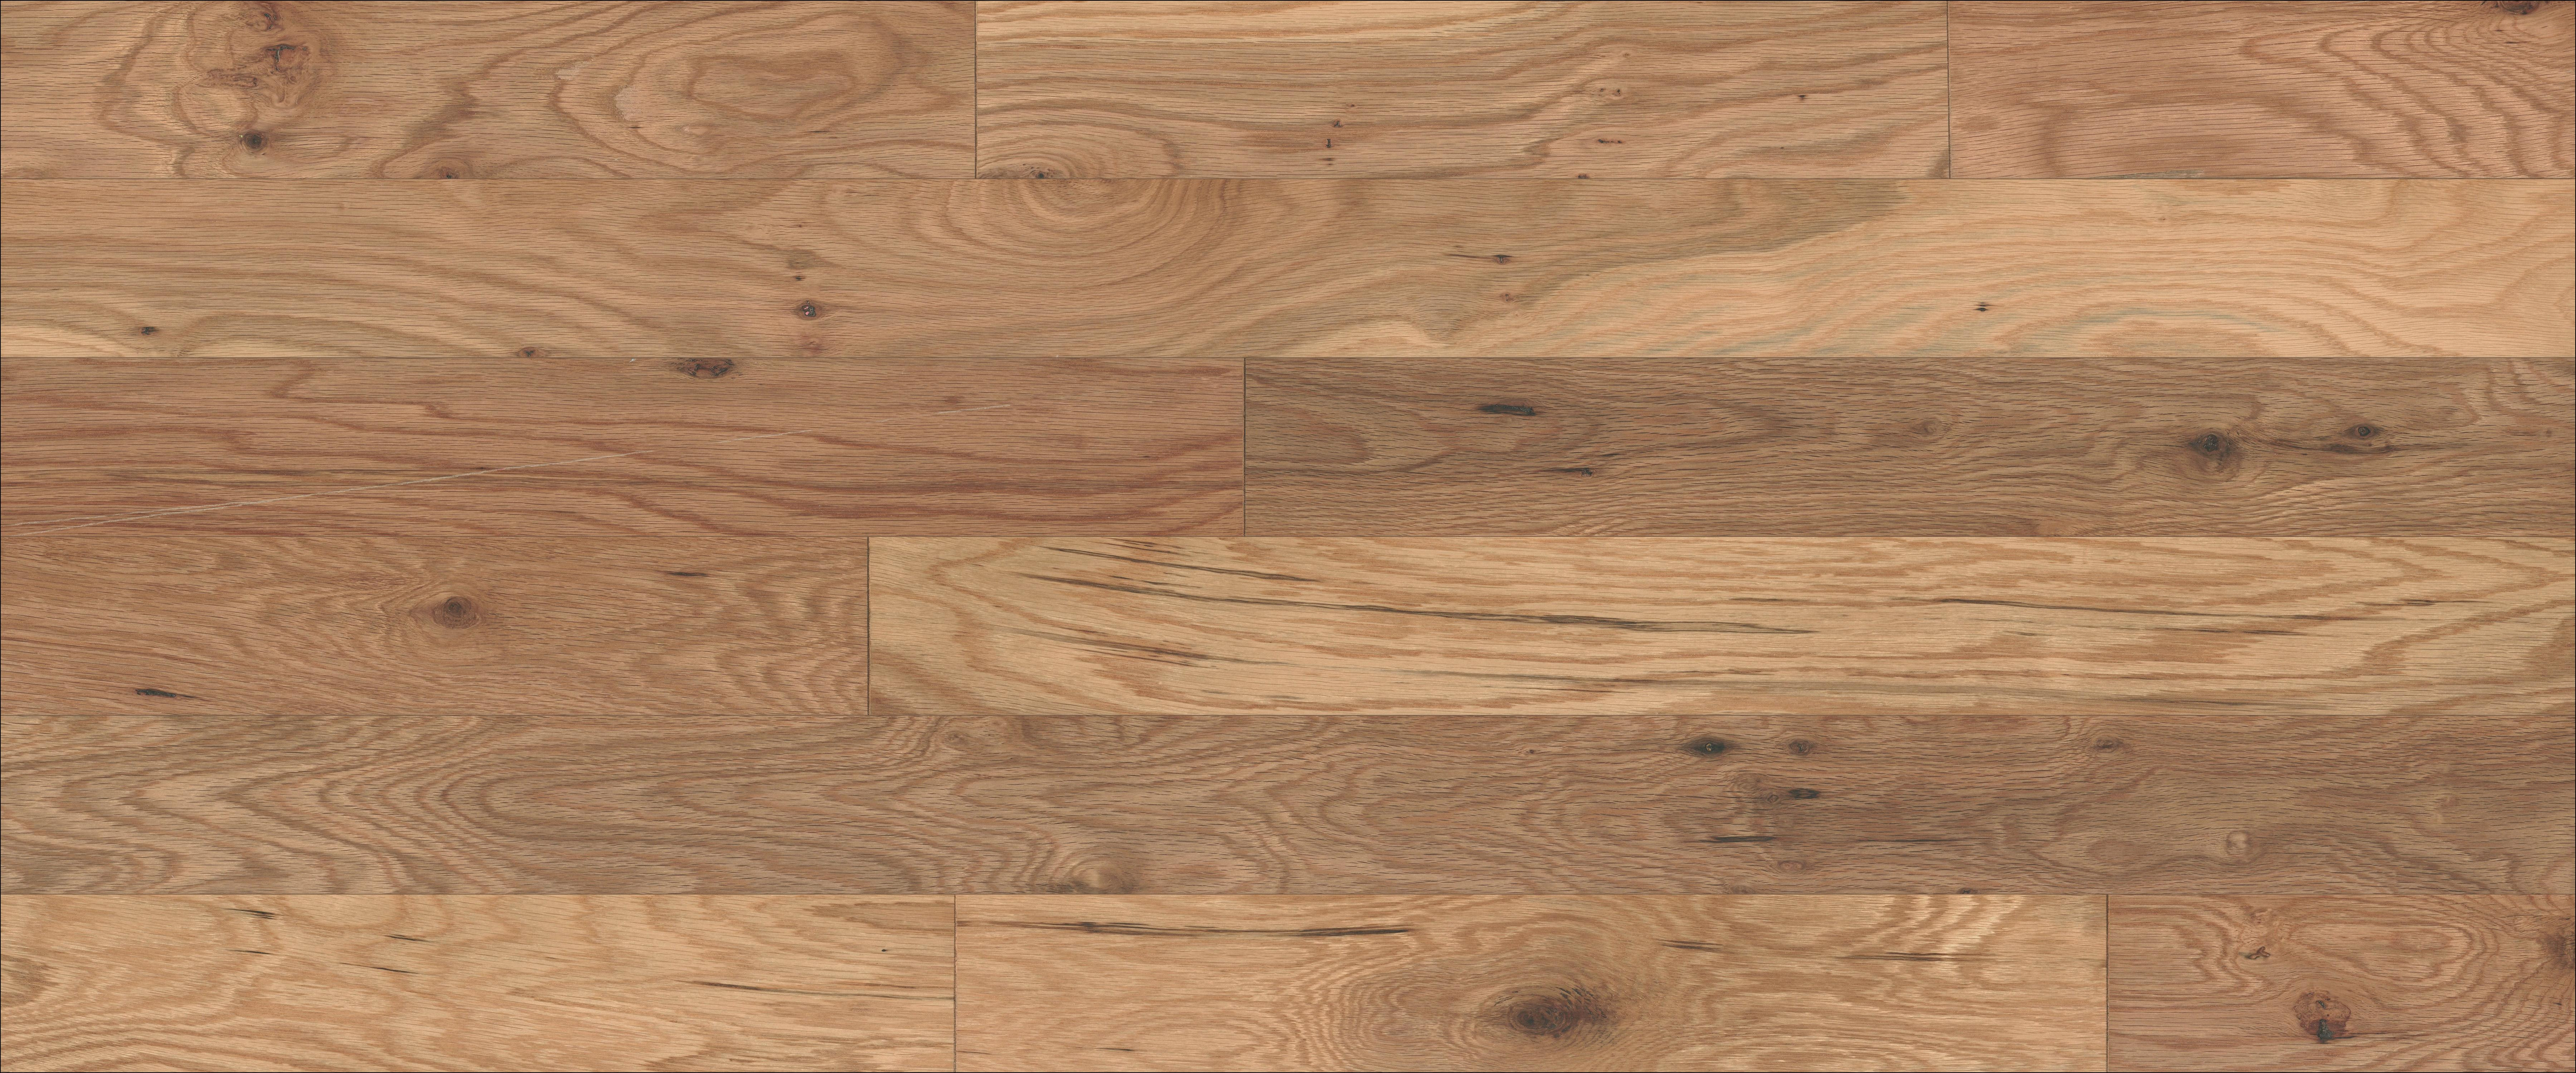 27 Lovely Mullican Vs Bruce Hardwood Flooring 2022 free download mullican vs bruce hardwood flooring of wide plank flooring ideas pertaining to wide plank white oak wood flooring galerie mullican ridgecrest white oak natural 1 2 thick